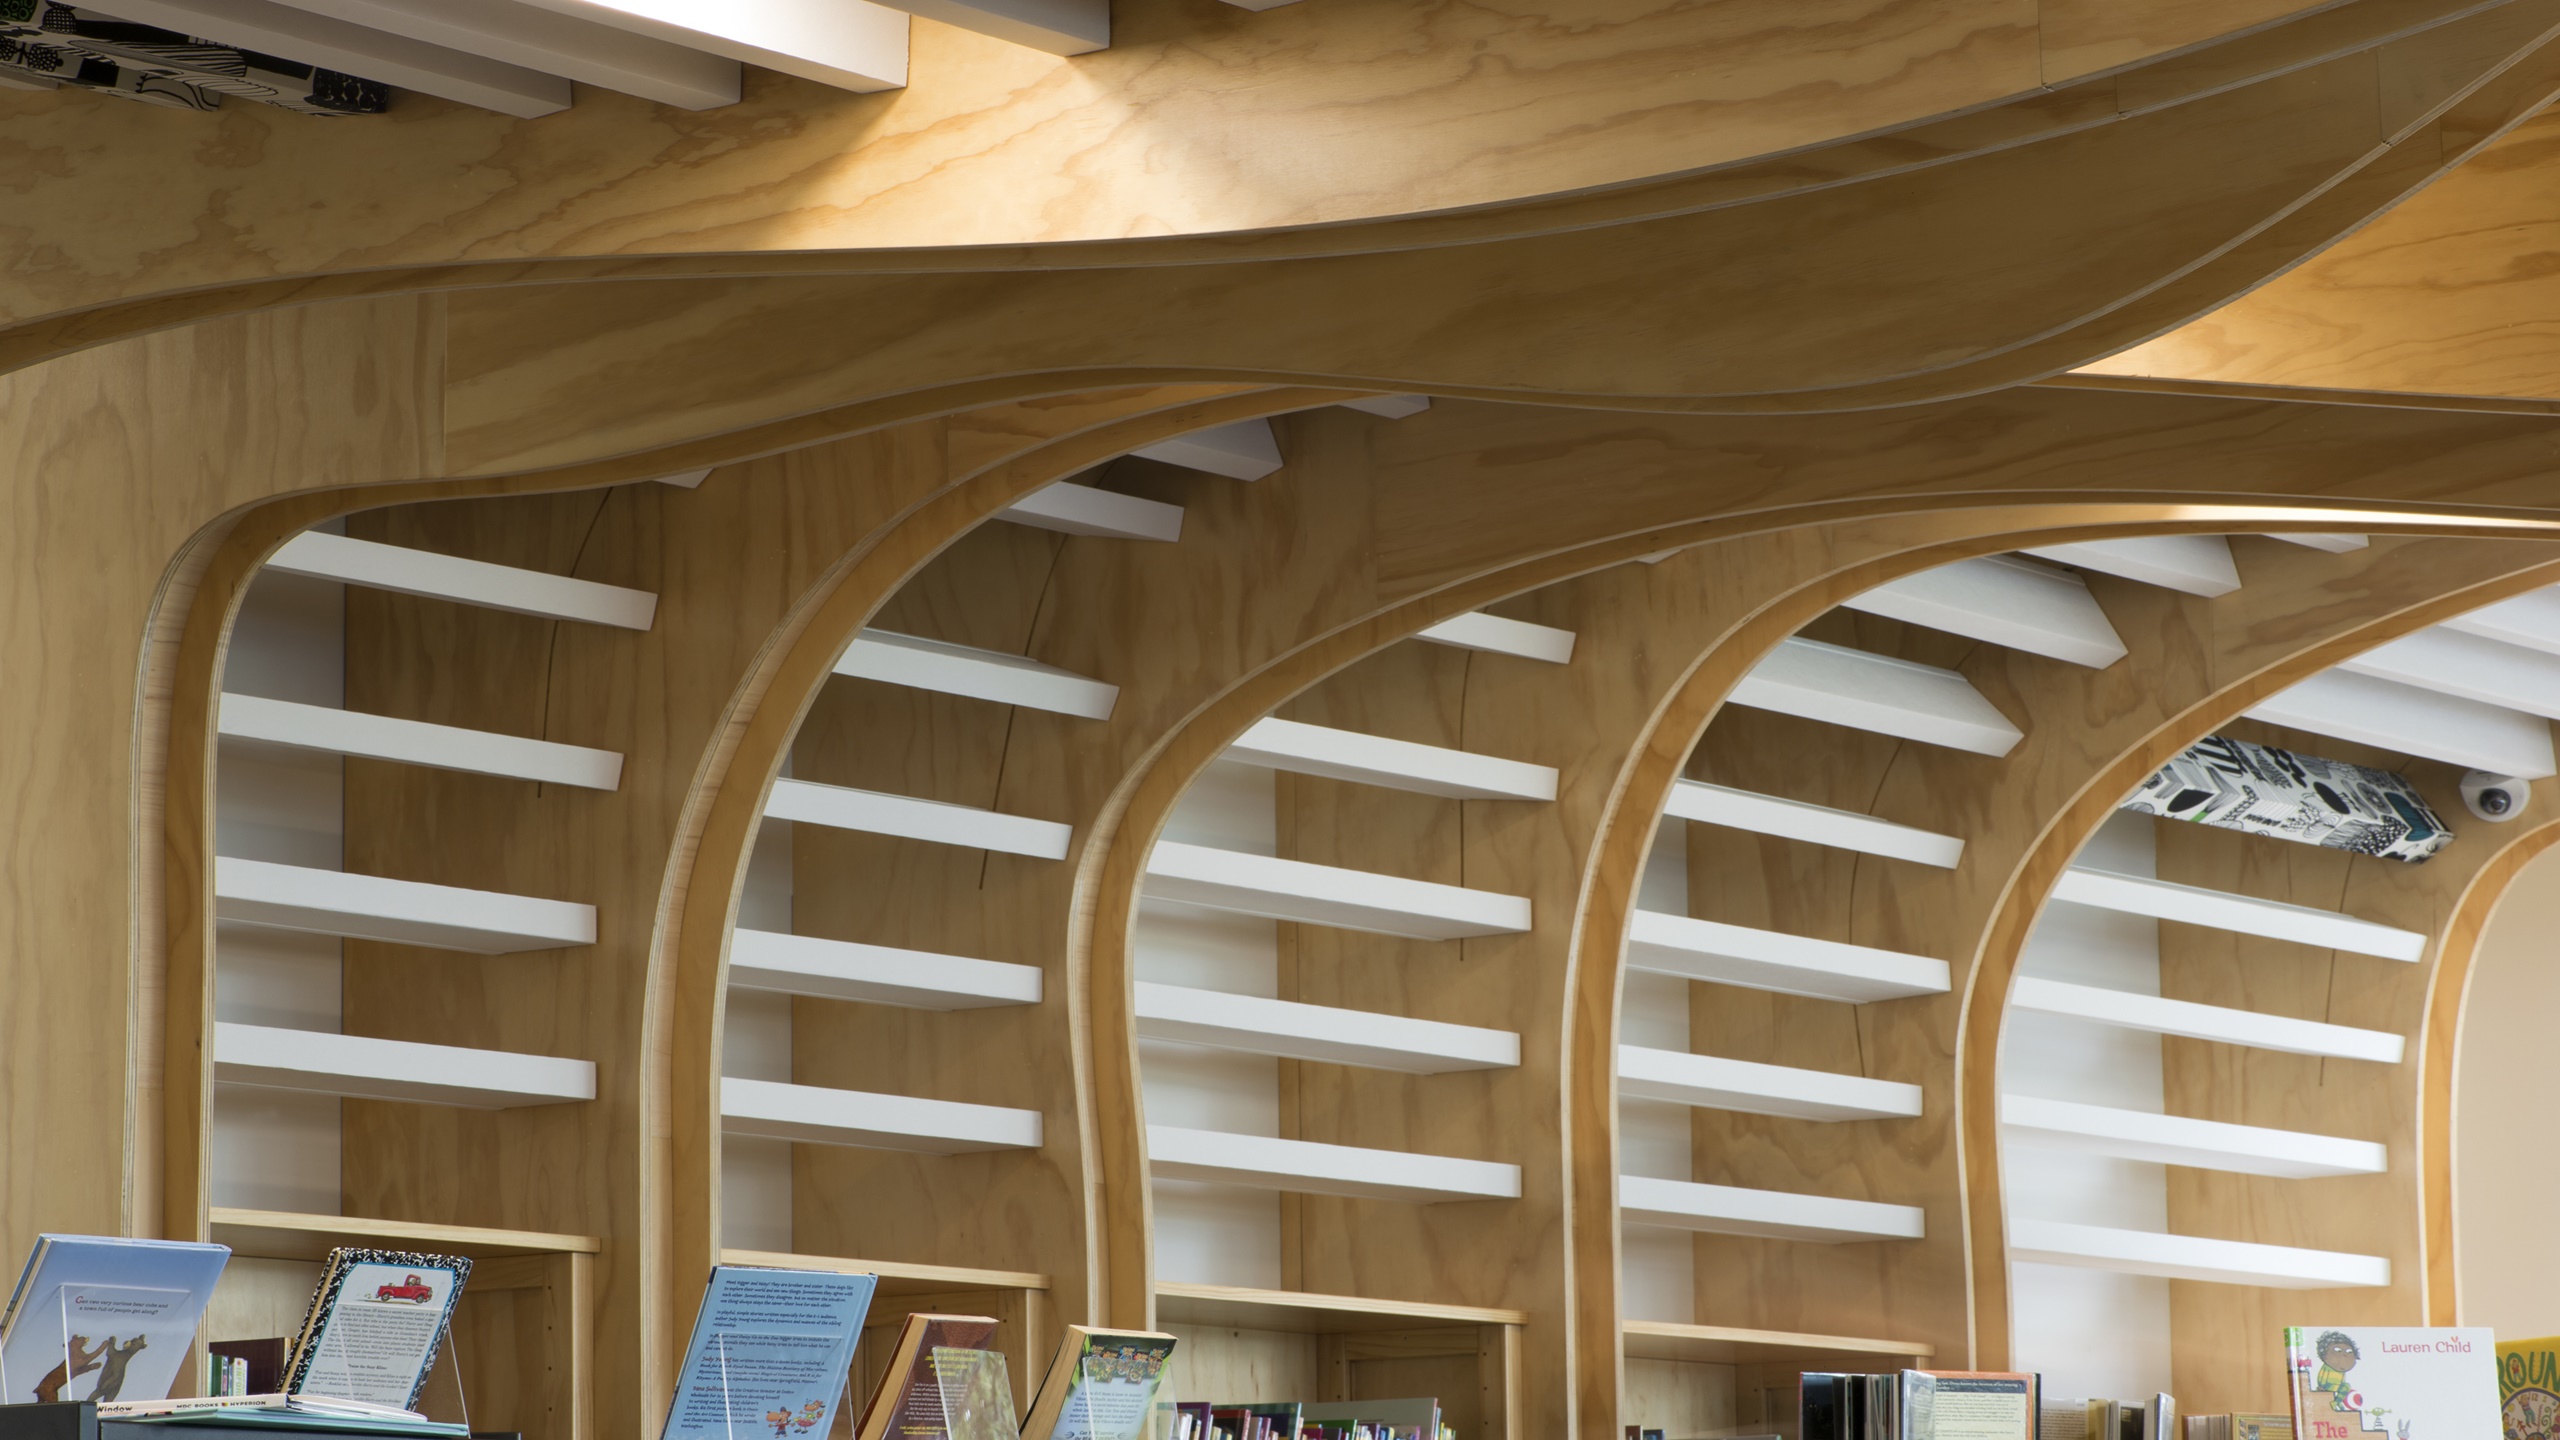 Devonport Library showing white baffle beams installed onto an undulating ceiling feature